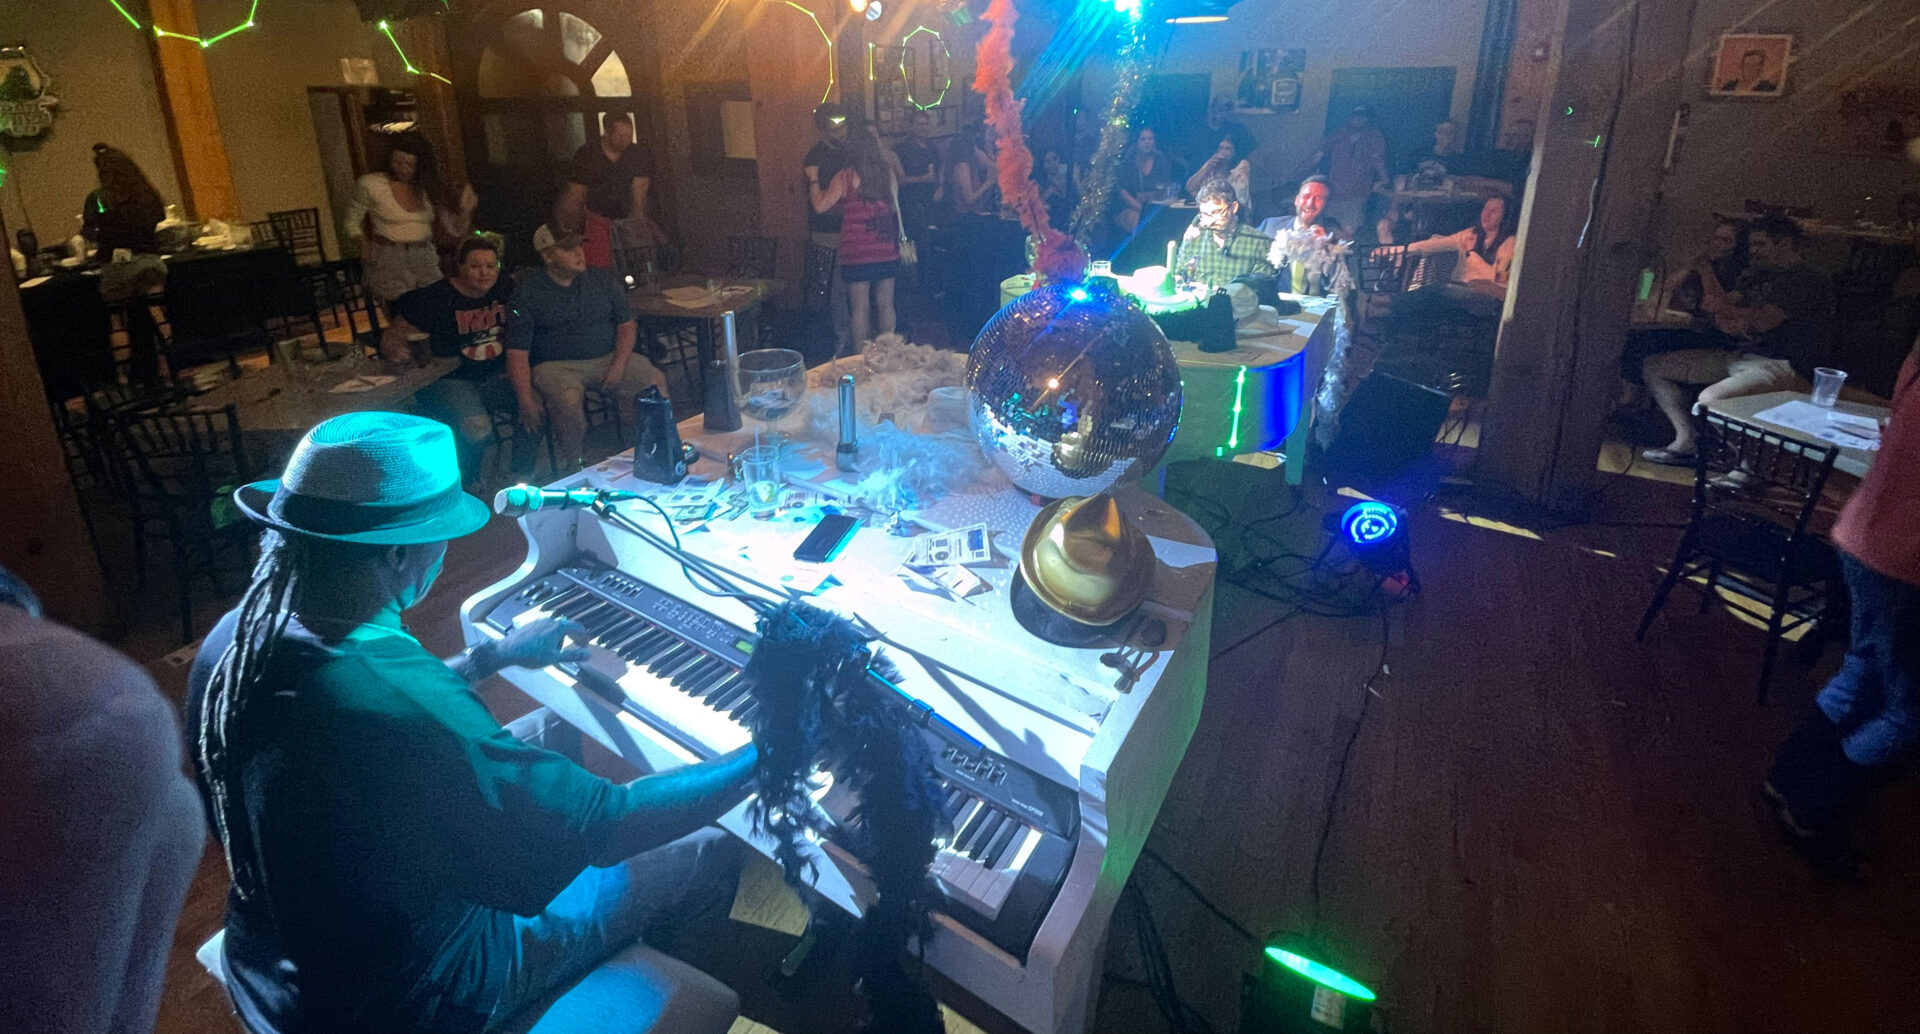 A group of people sitting around a table with a piano.